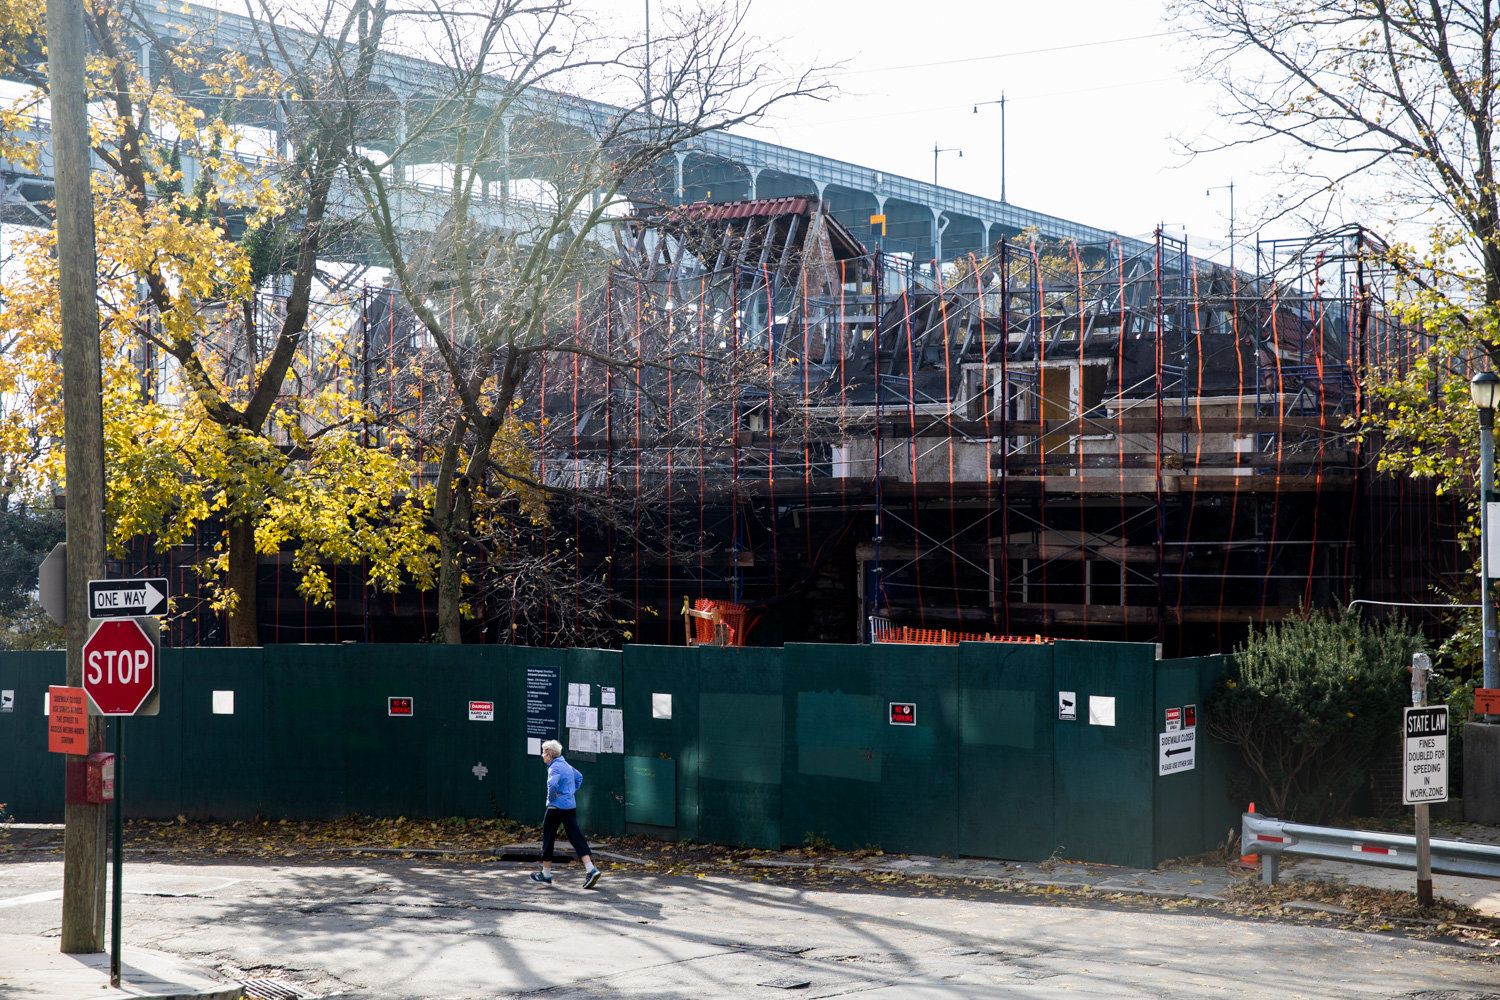 Neighbors have fought tirelessly to save the historic Villa Rosa Bonheur, but it seems demolition is inevitable so that developers can construct a much larger apartment building on Palisade Avenue in its stead.